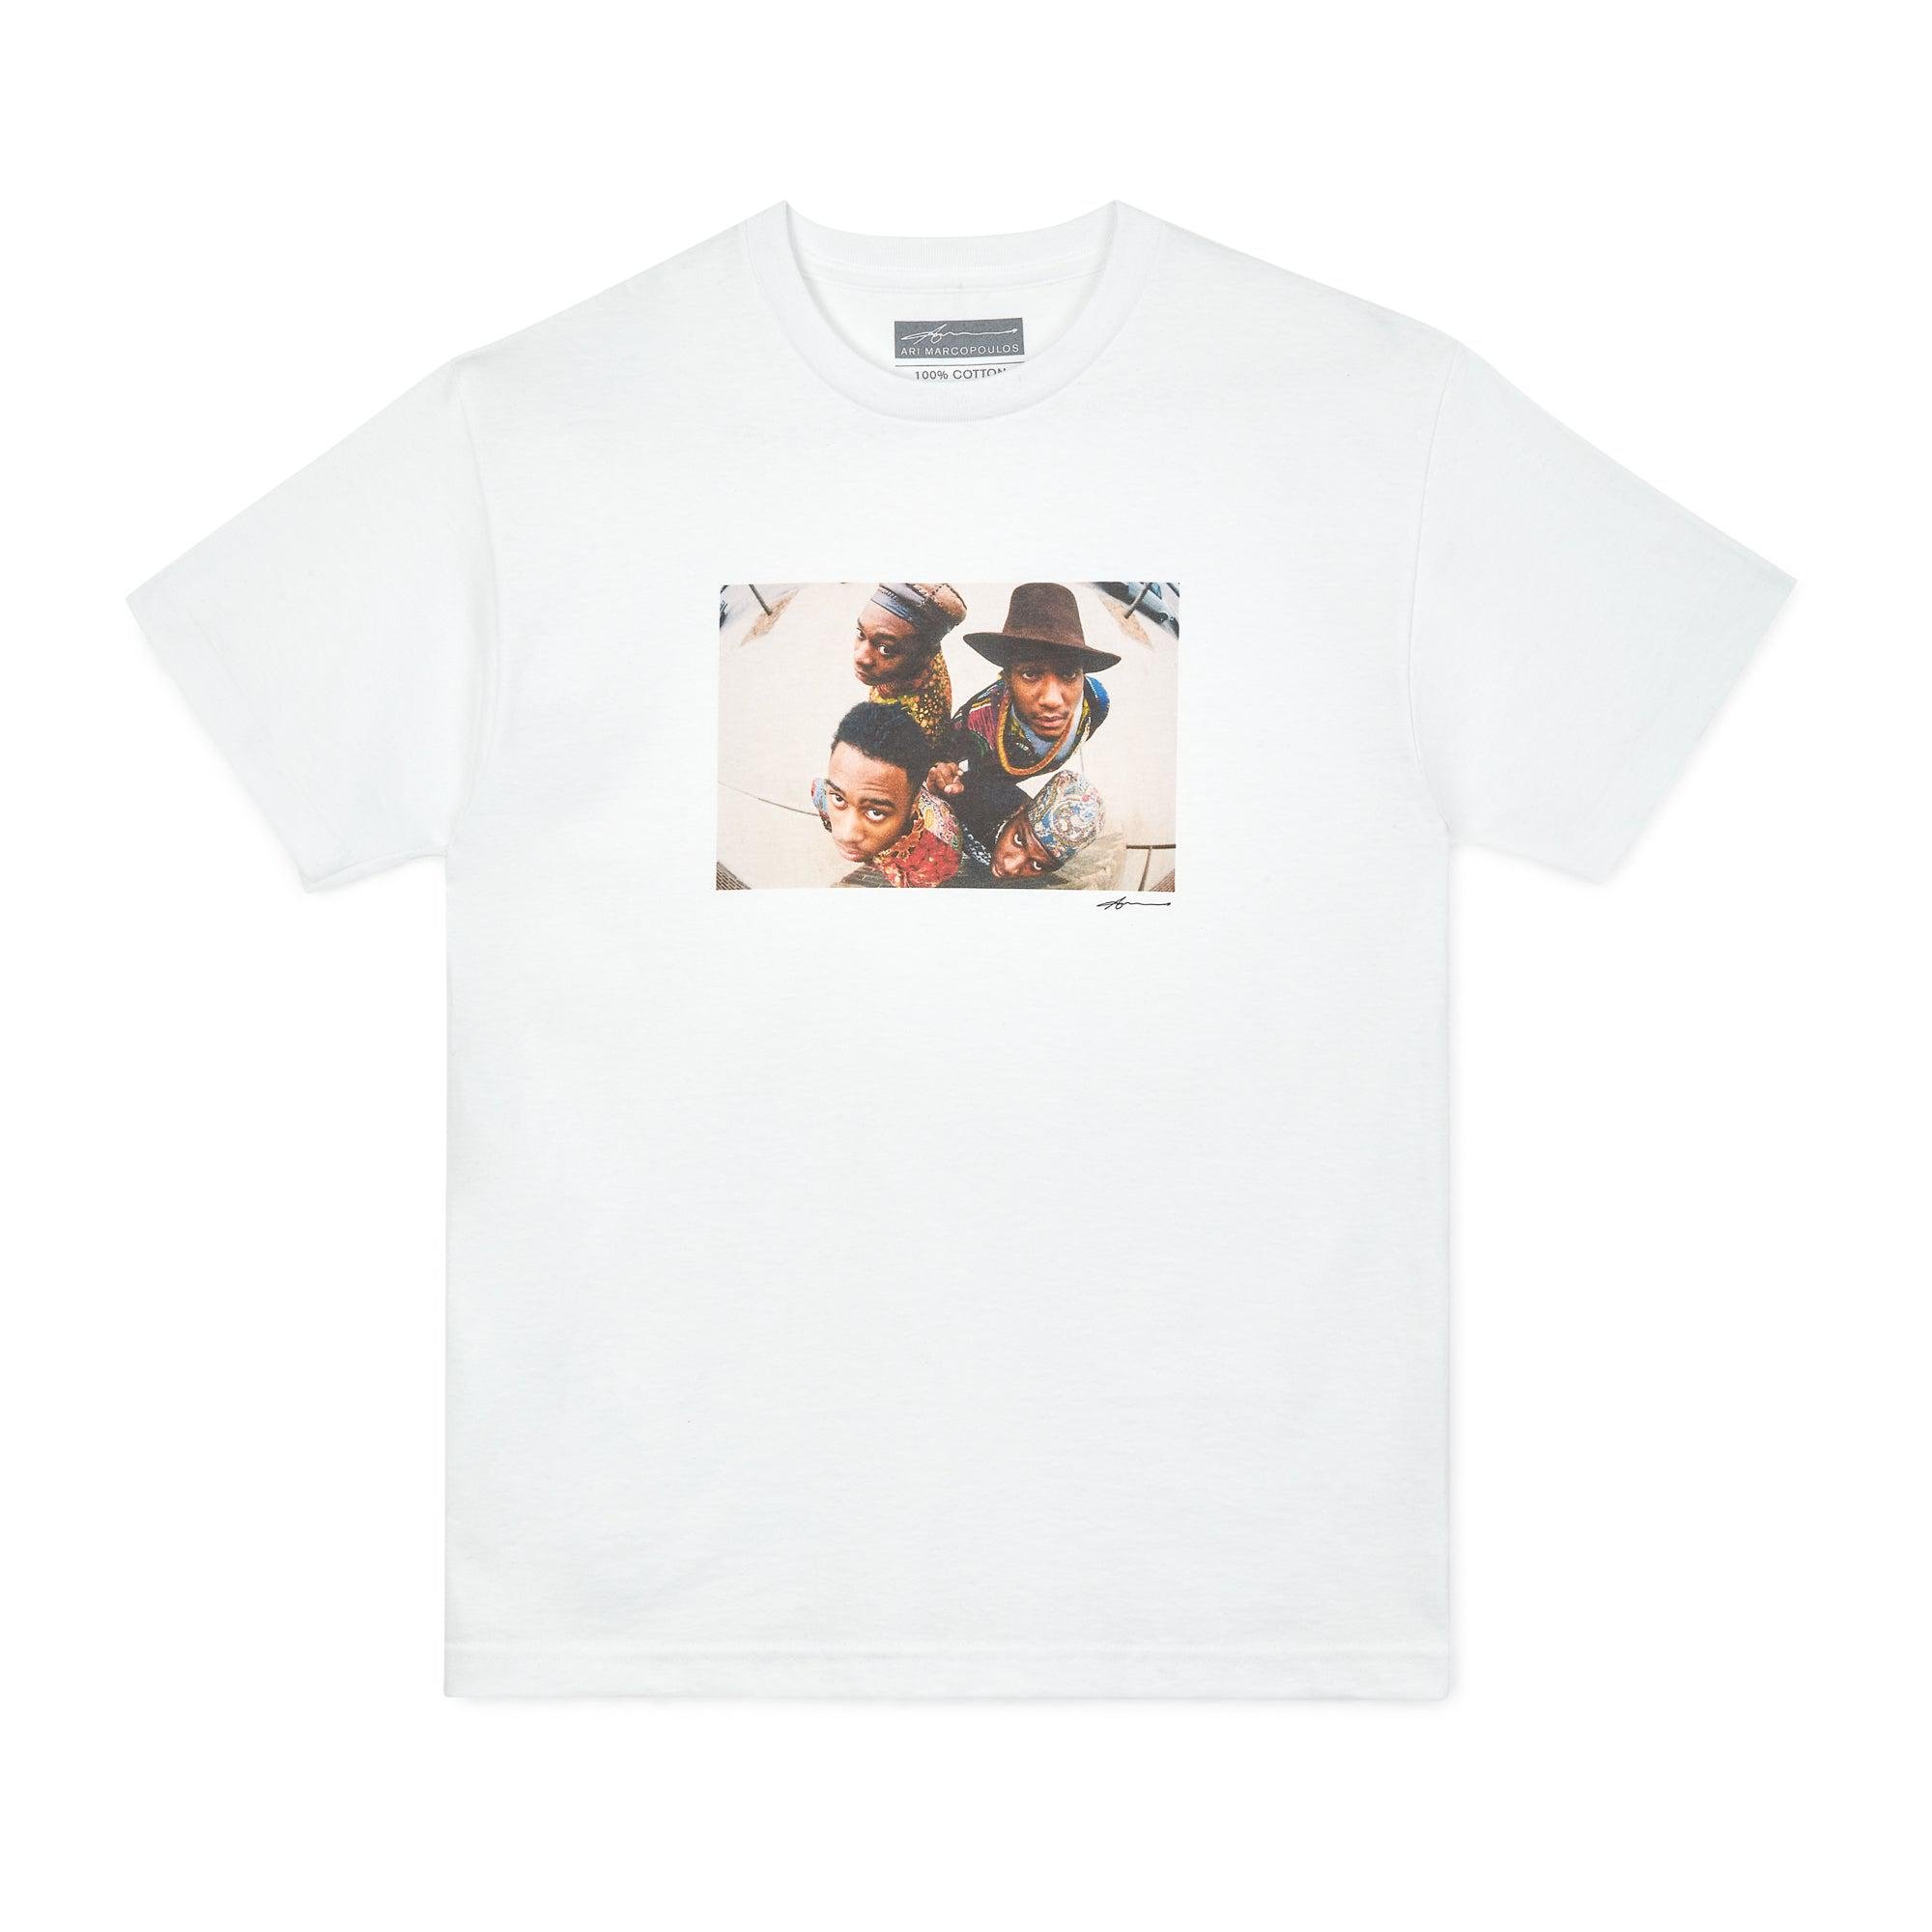 Ari Marcopoulos A Tribe Called Quest New York T-Shirt (White) by ARI MARCOPOULOS